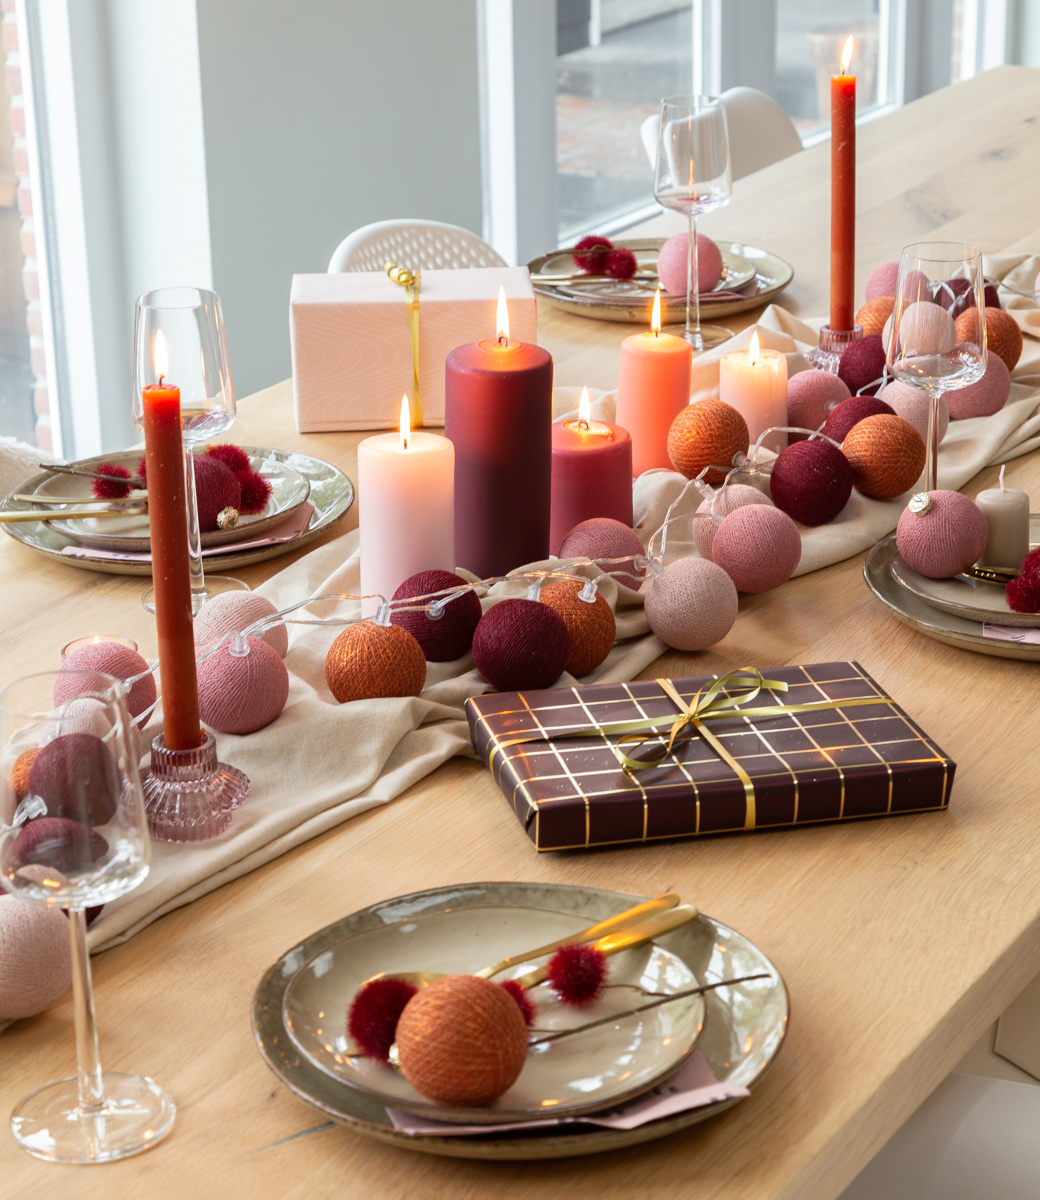 Make your table the eye-catcher of your home, bohemian spice